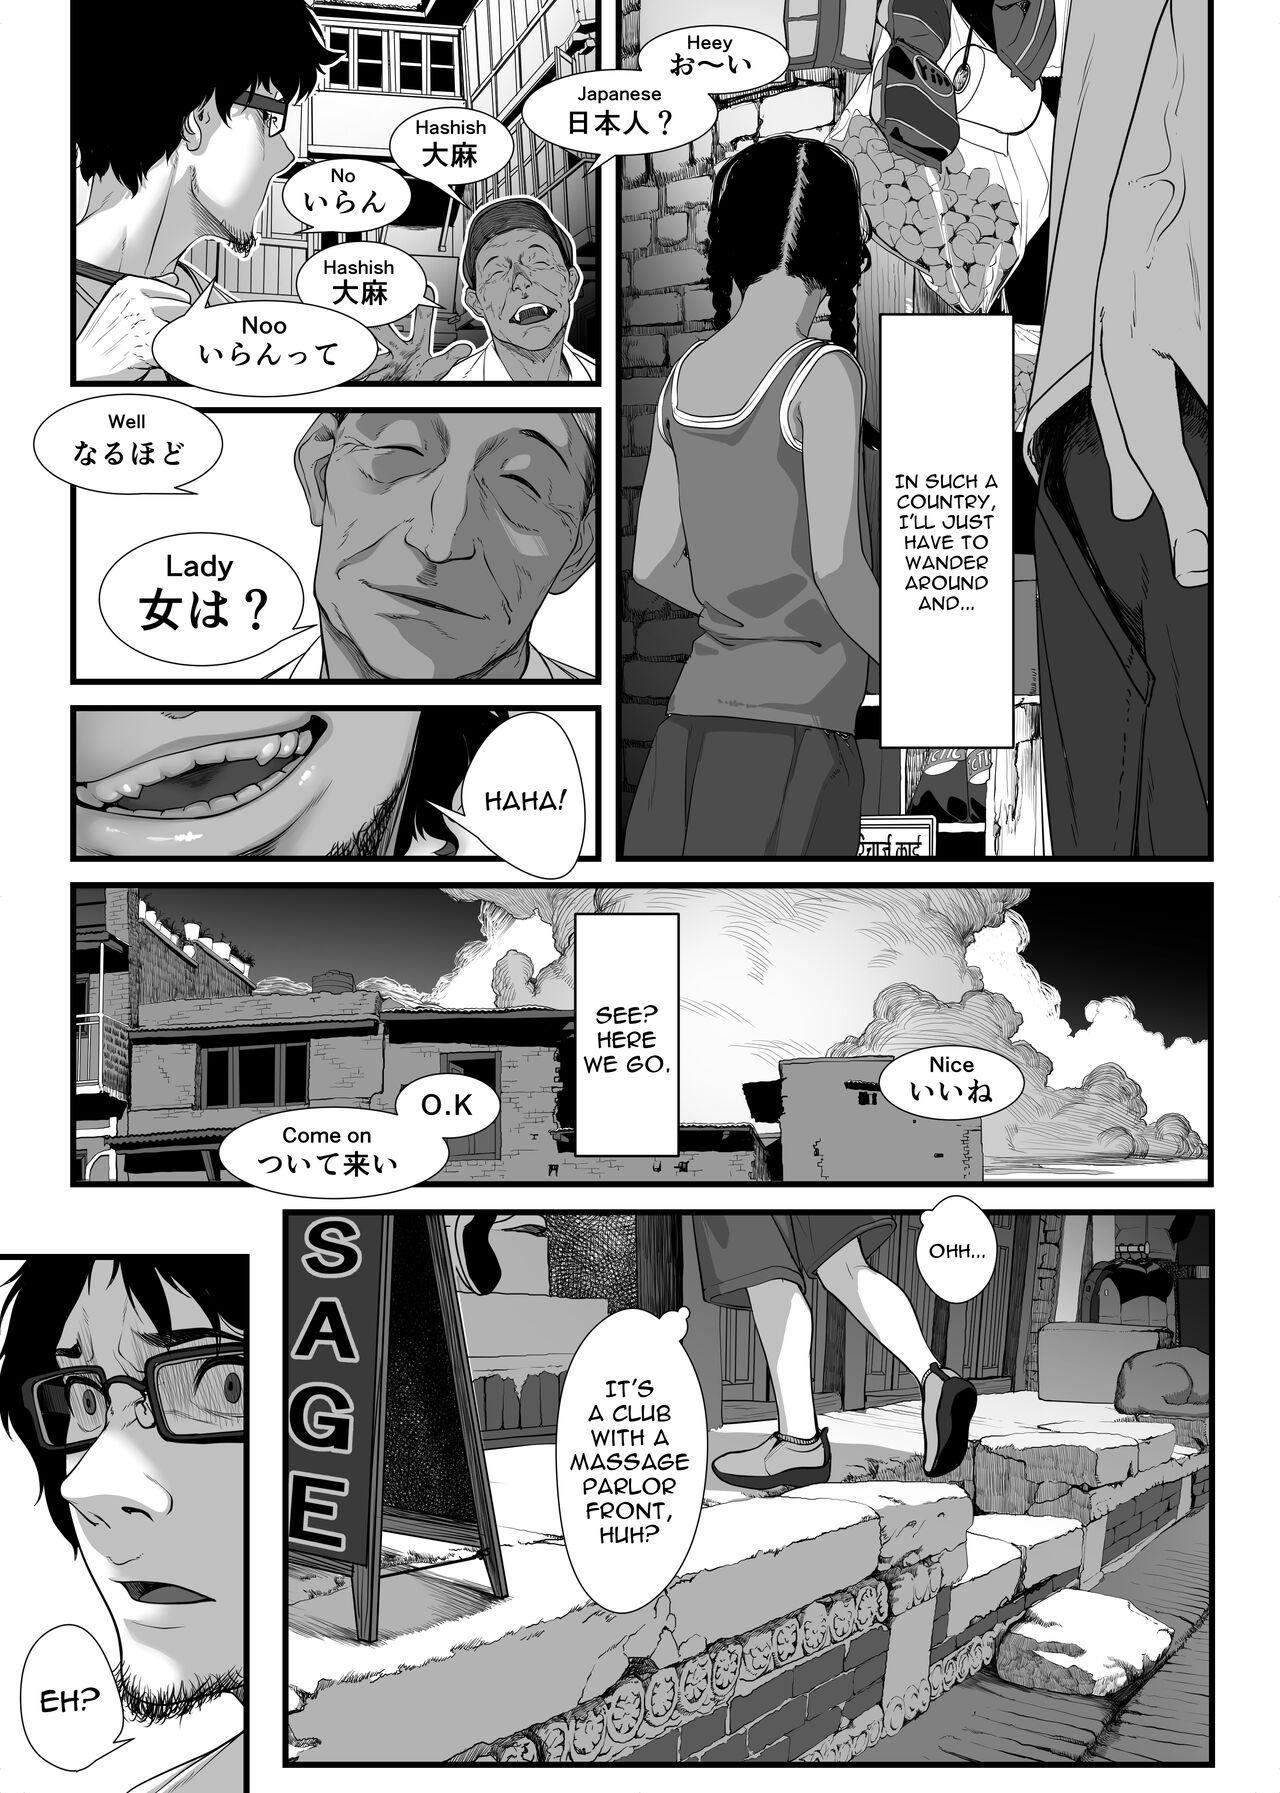 Gay Blondhair A Story About Highly Risky Sex Up to The Extreme Limit in An Asian Brothel - Original Rough Sex - Page 5